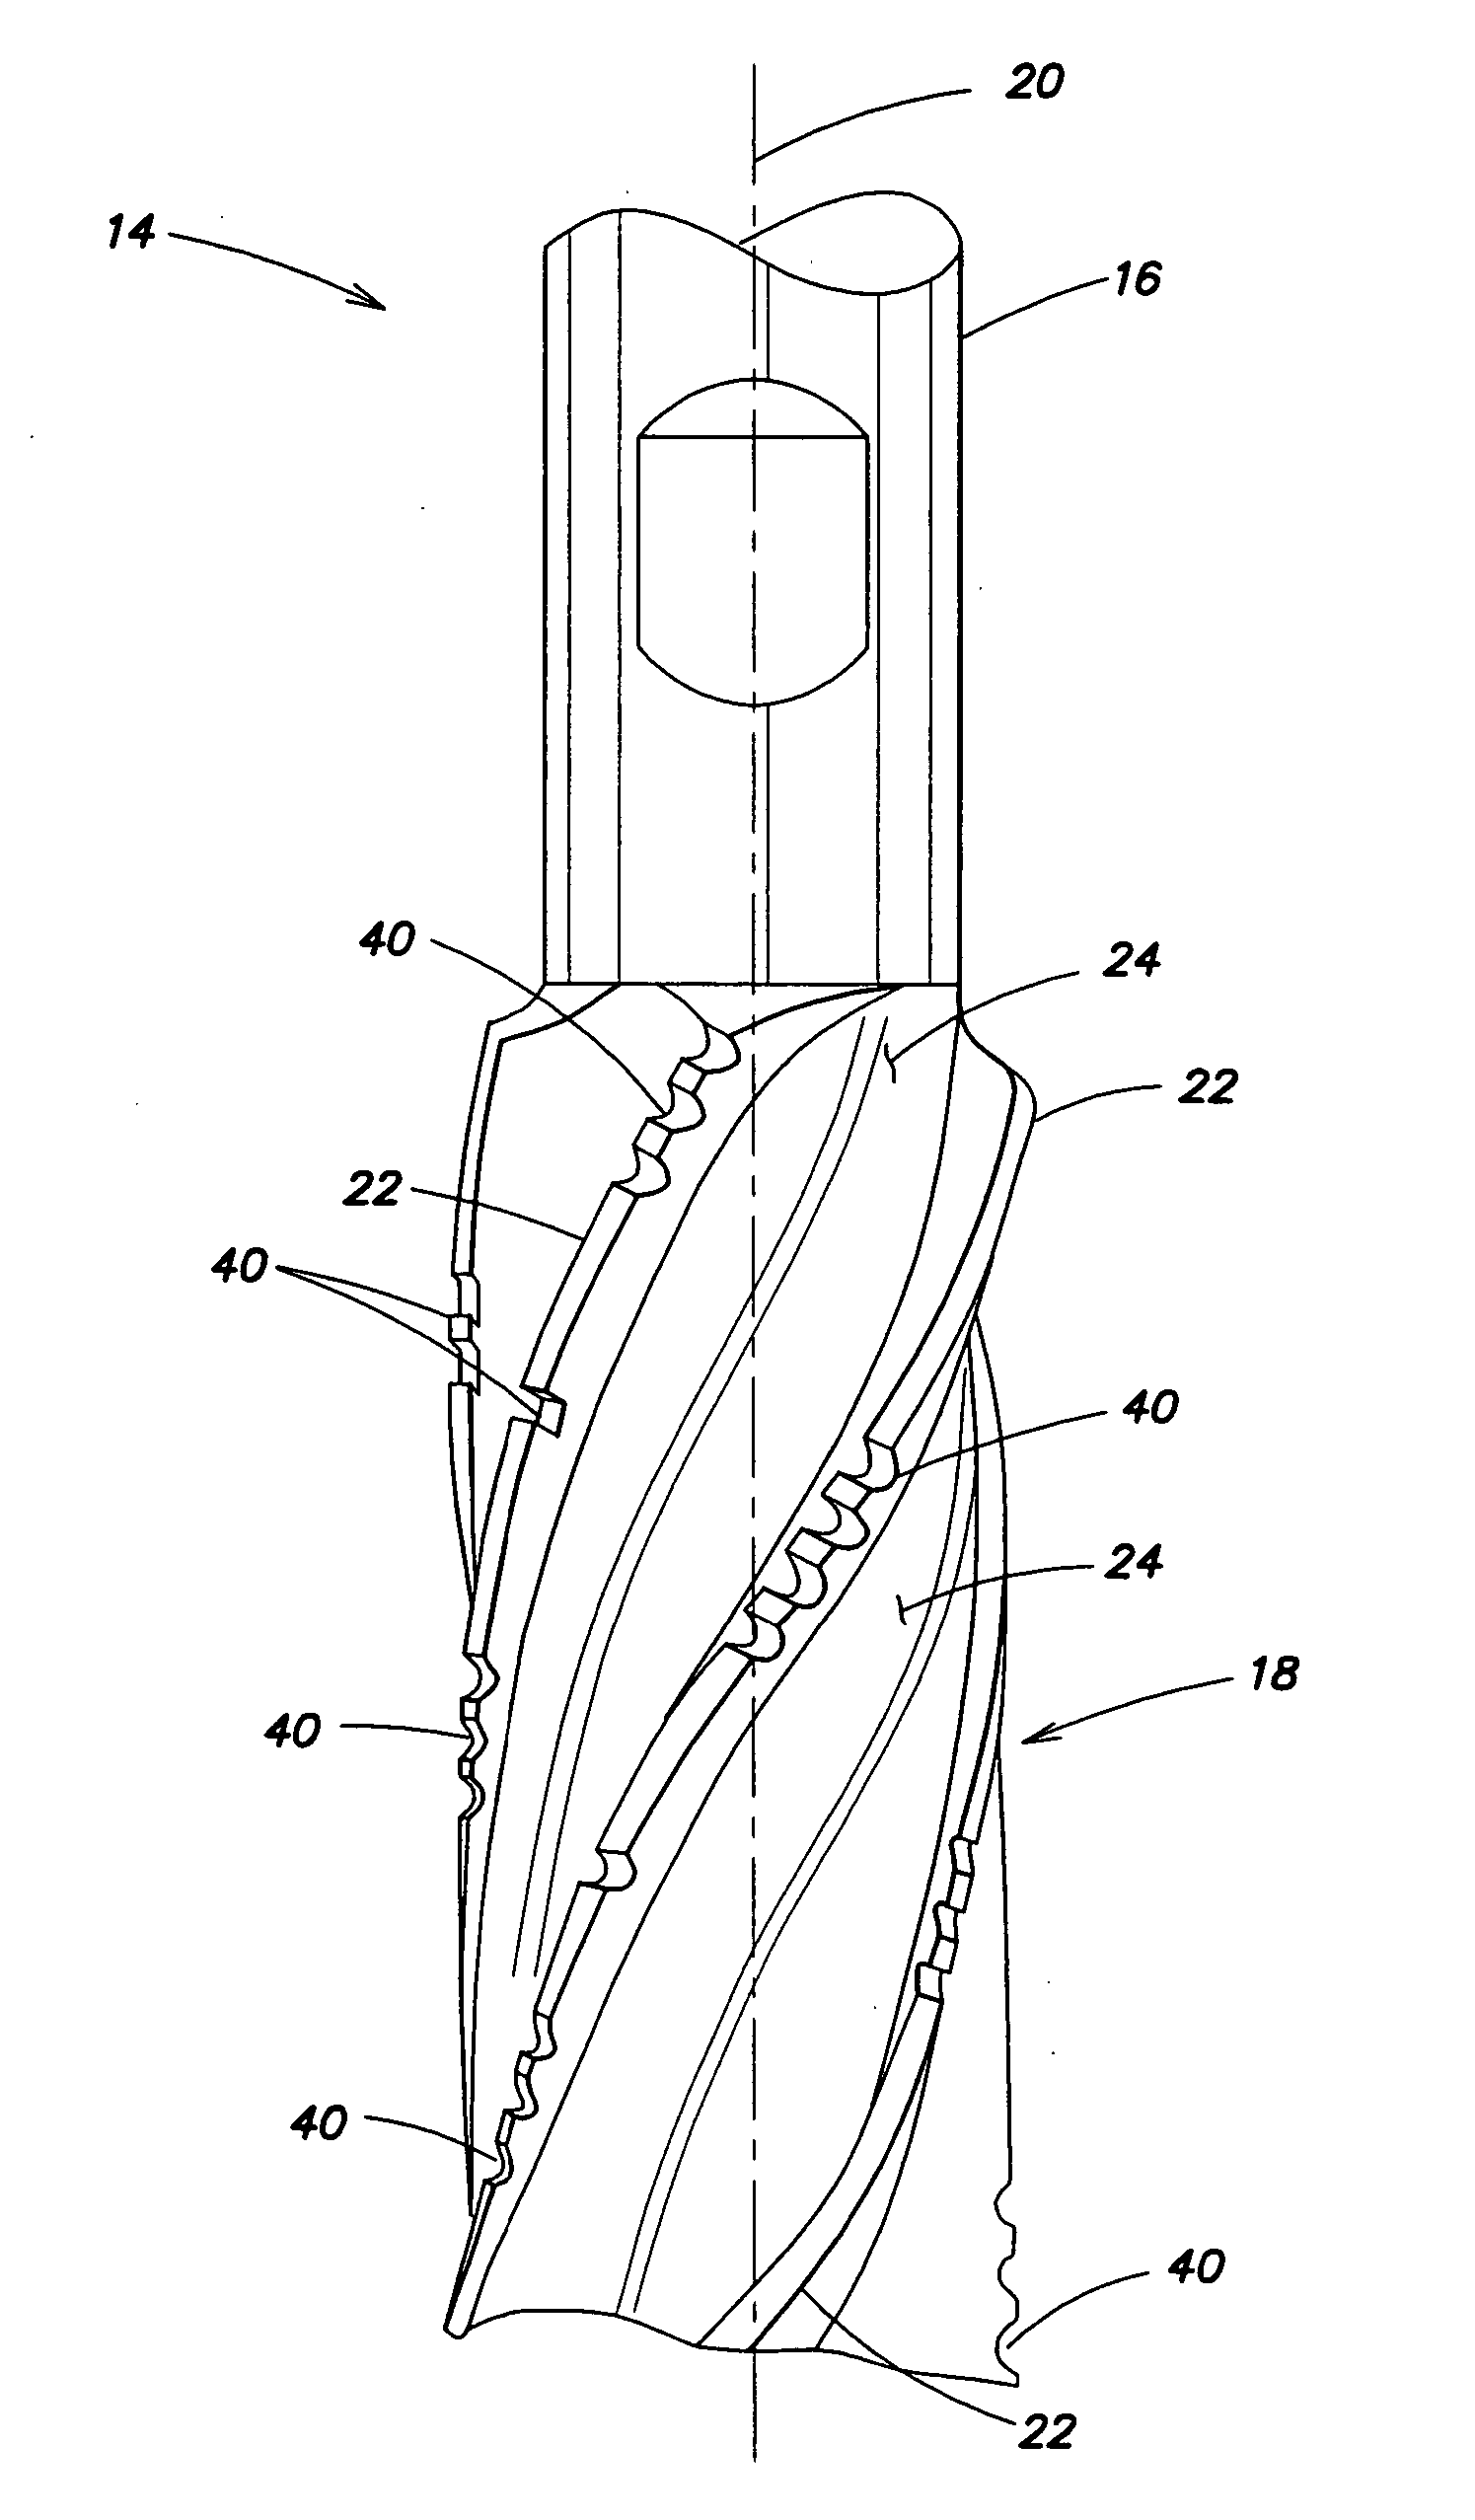 Rotary cutting tool with non-uniform distribution of chip-breaking features